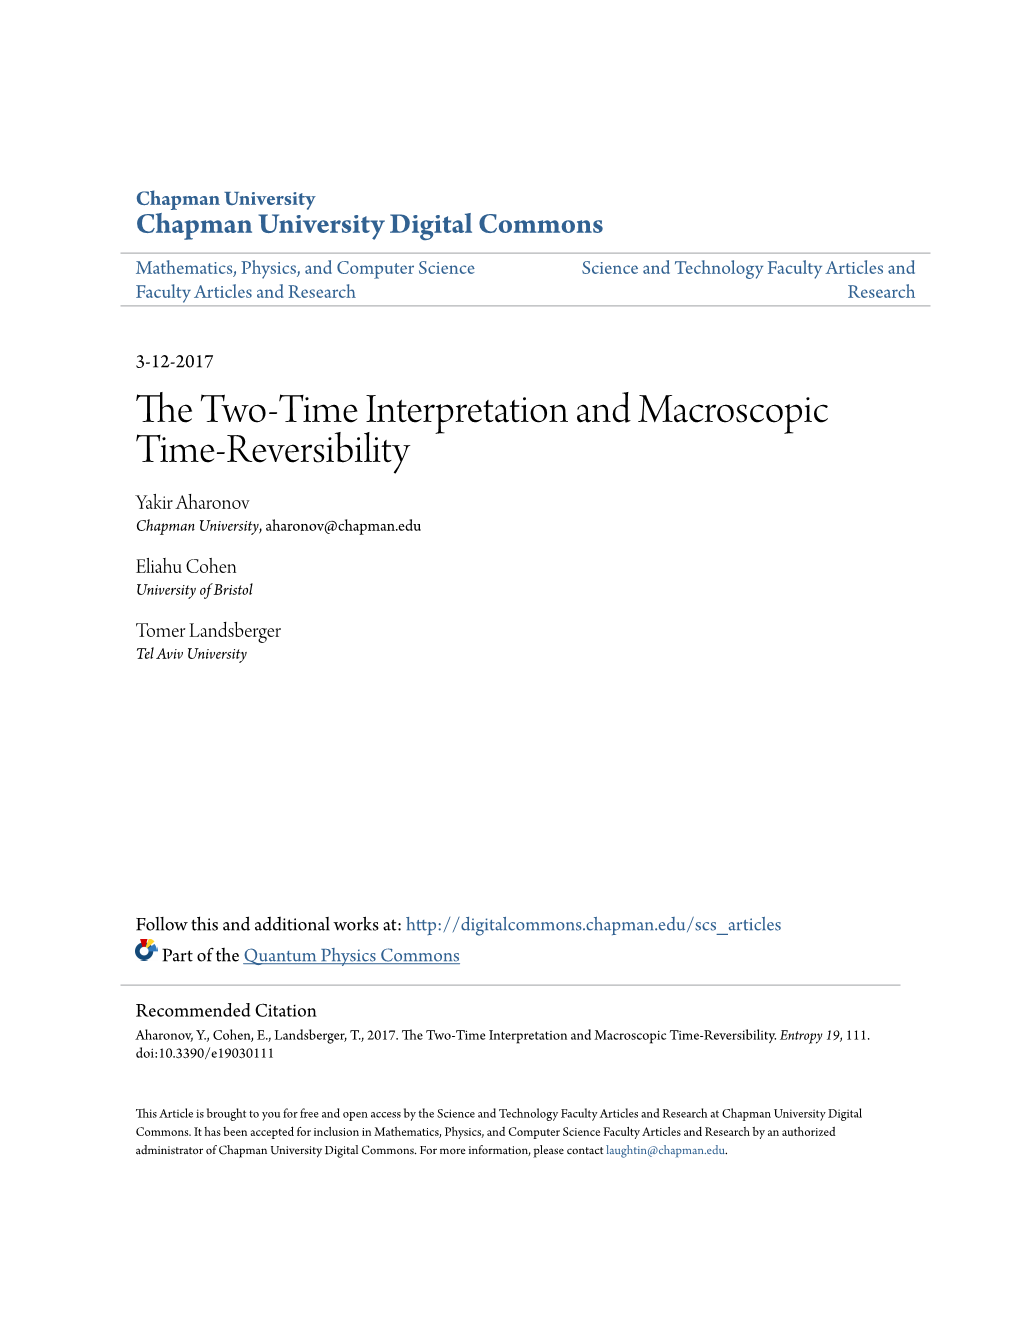 The Two-Time Interpretation and Macroscopic Time-Reversibility